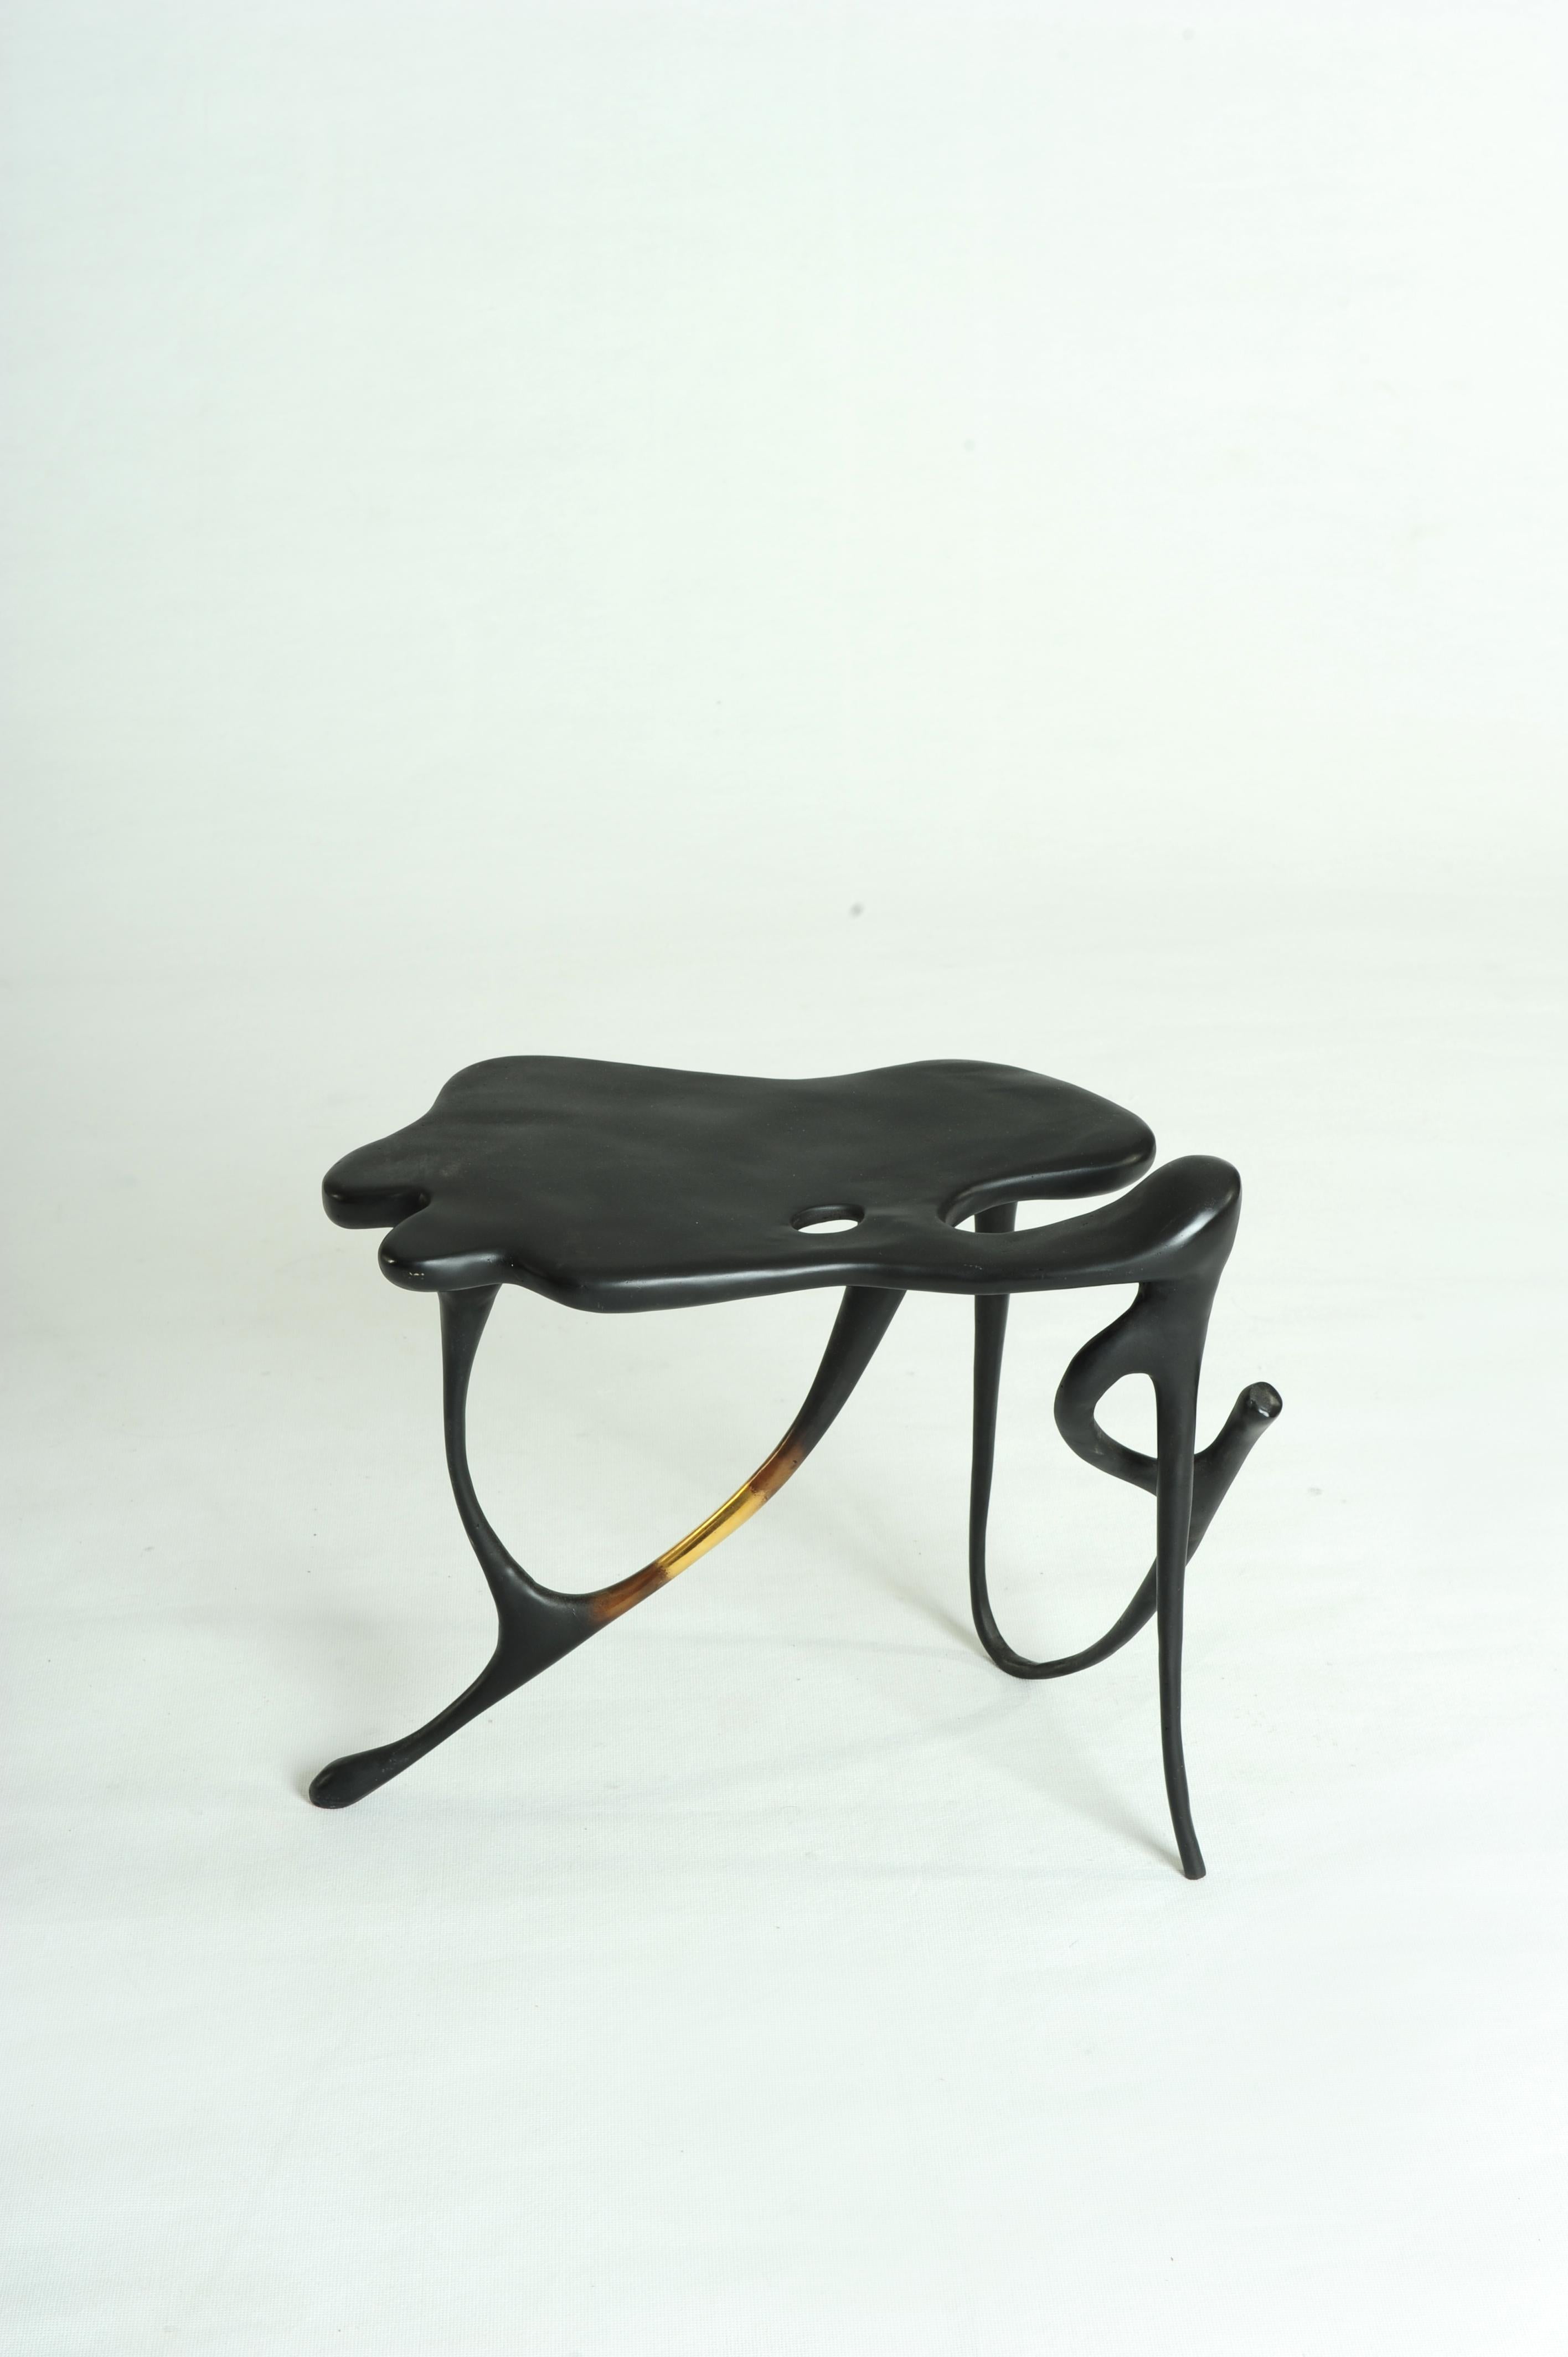 Calligraphic Sculpted Brass Side Table by Misaya For Sale 2